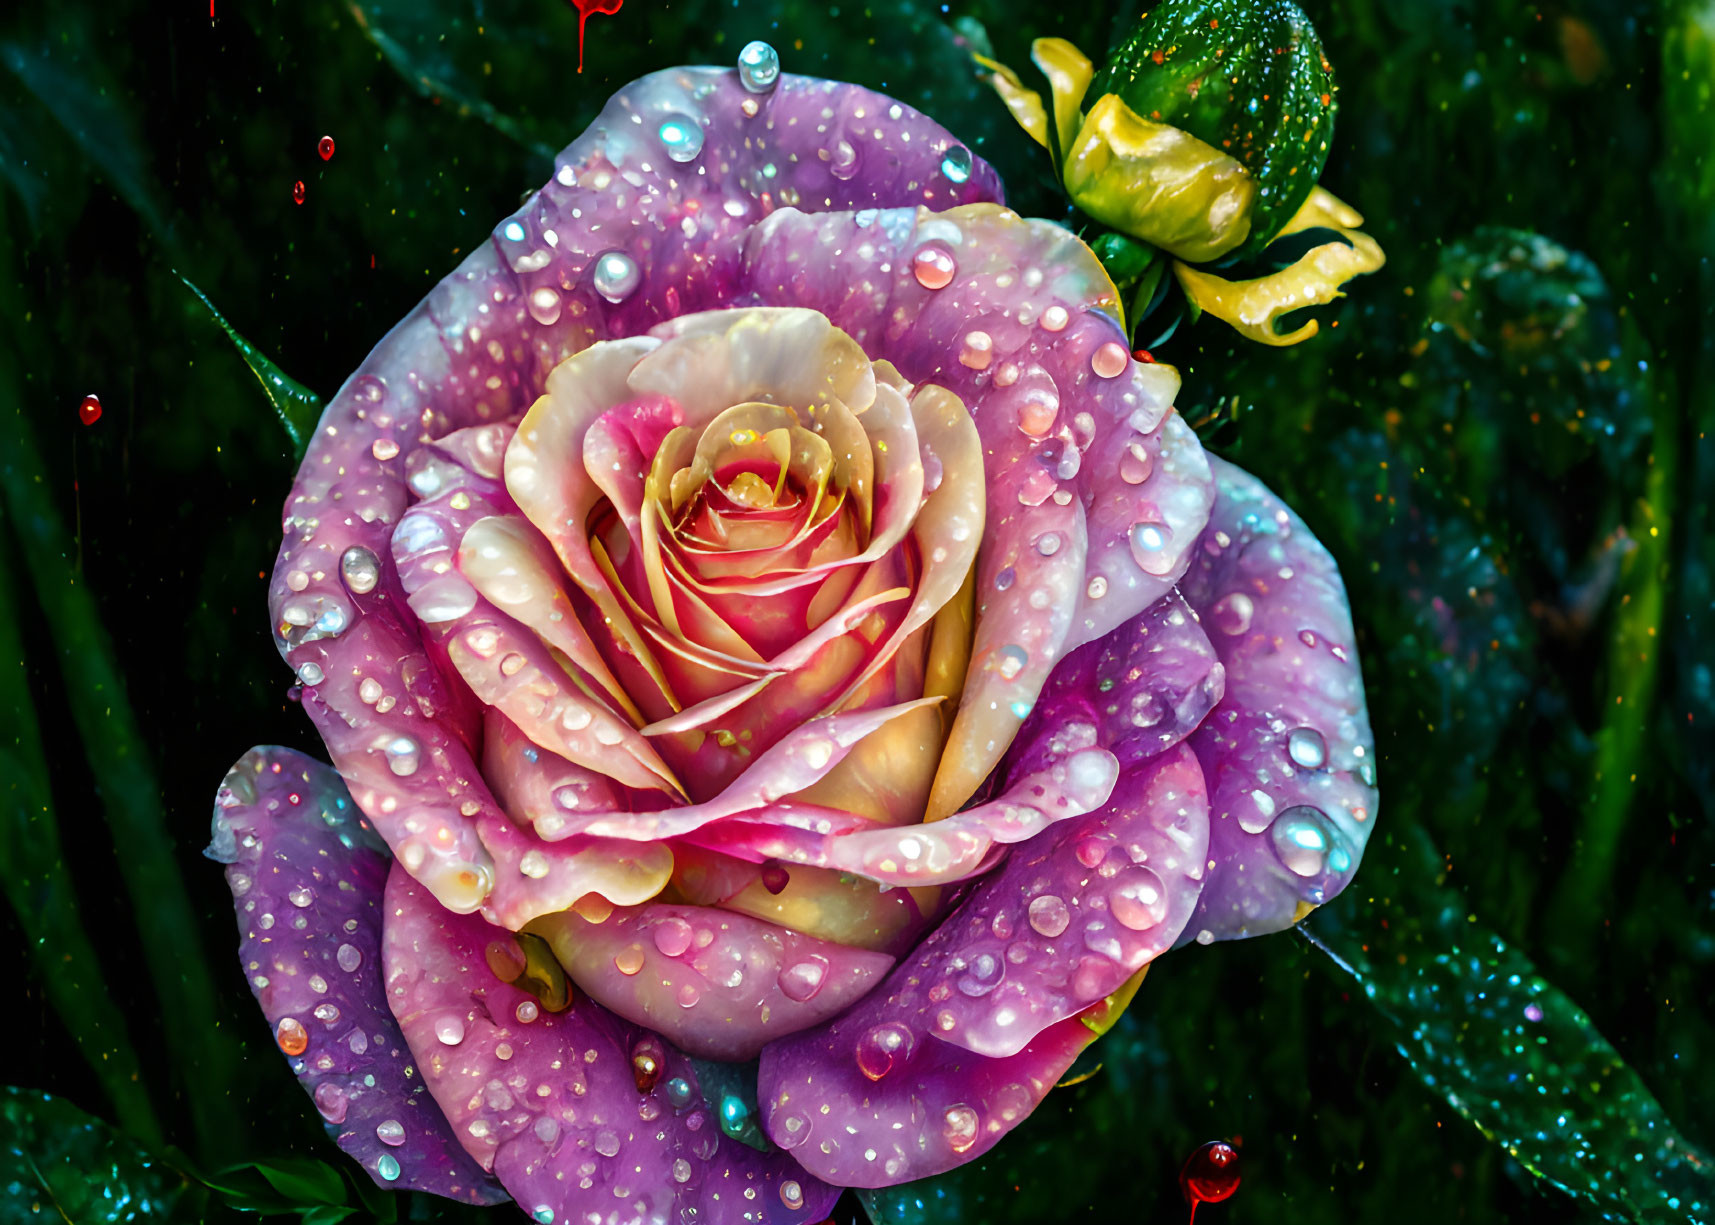 Close-up of multicolored rose with water droplets on petals against dark green background